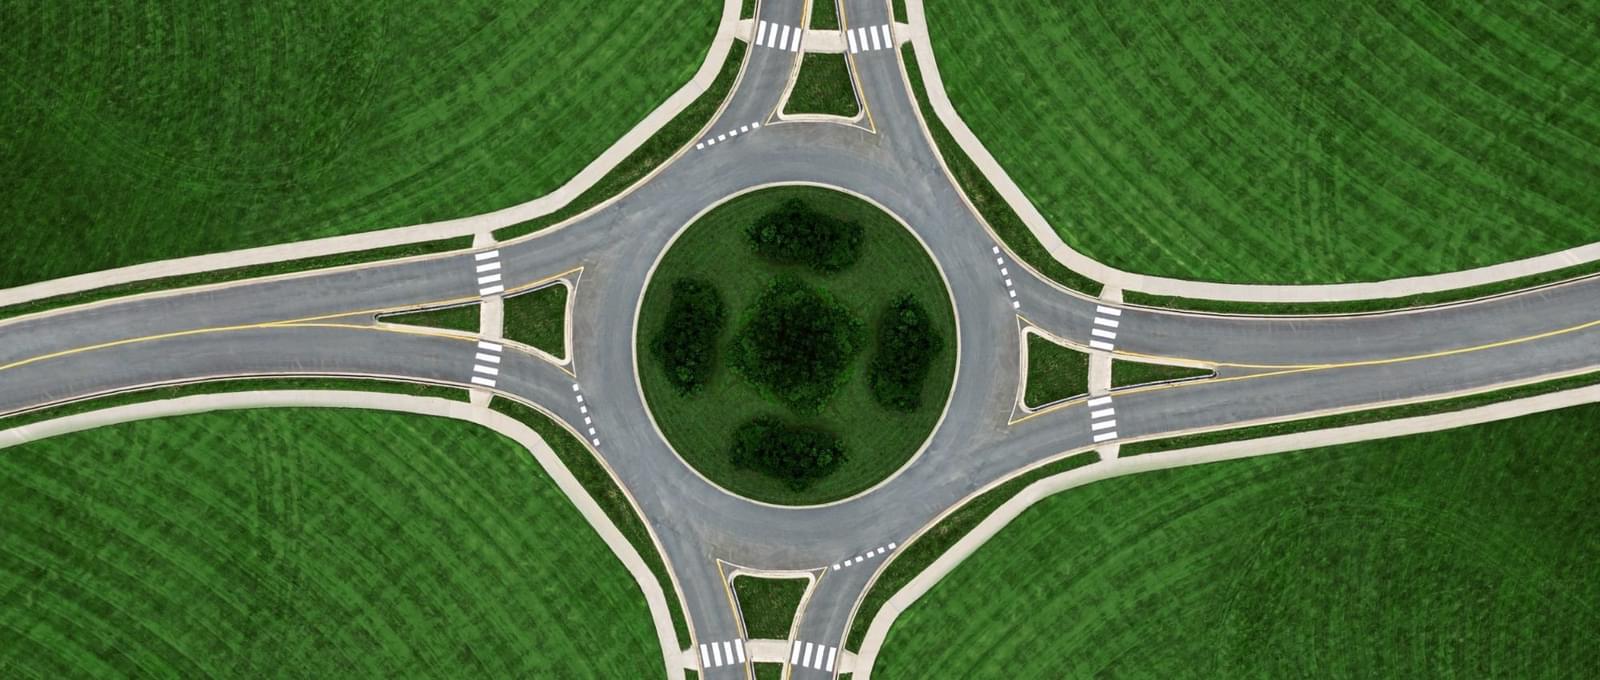 Roundabout with green grass uniquely positioned to bring together our audiences